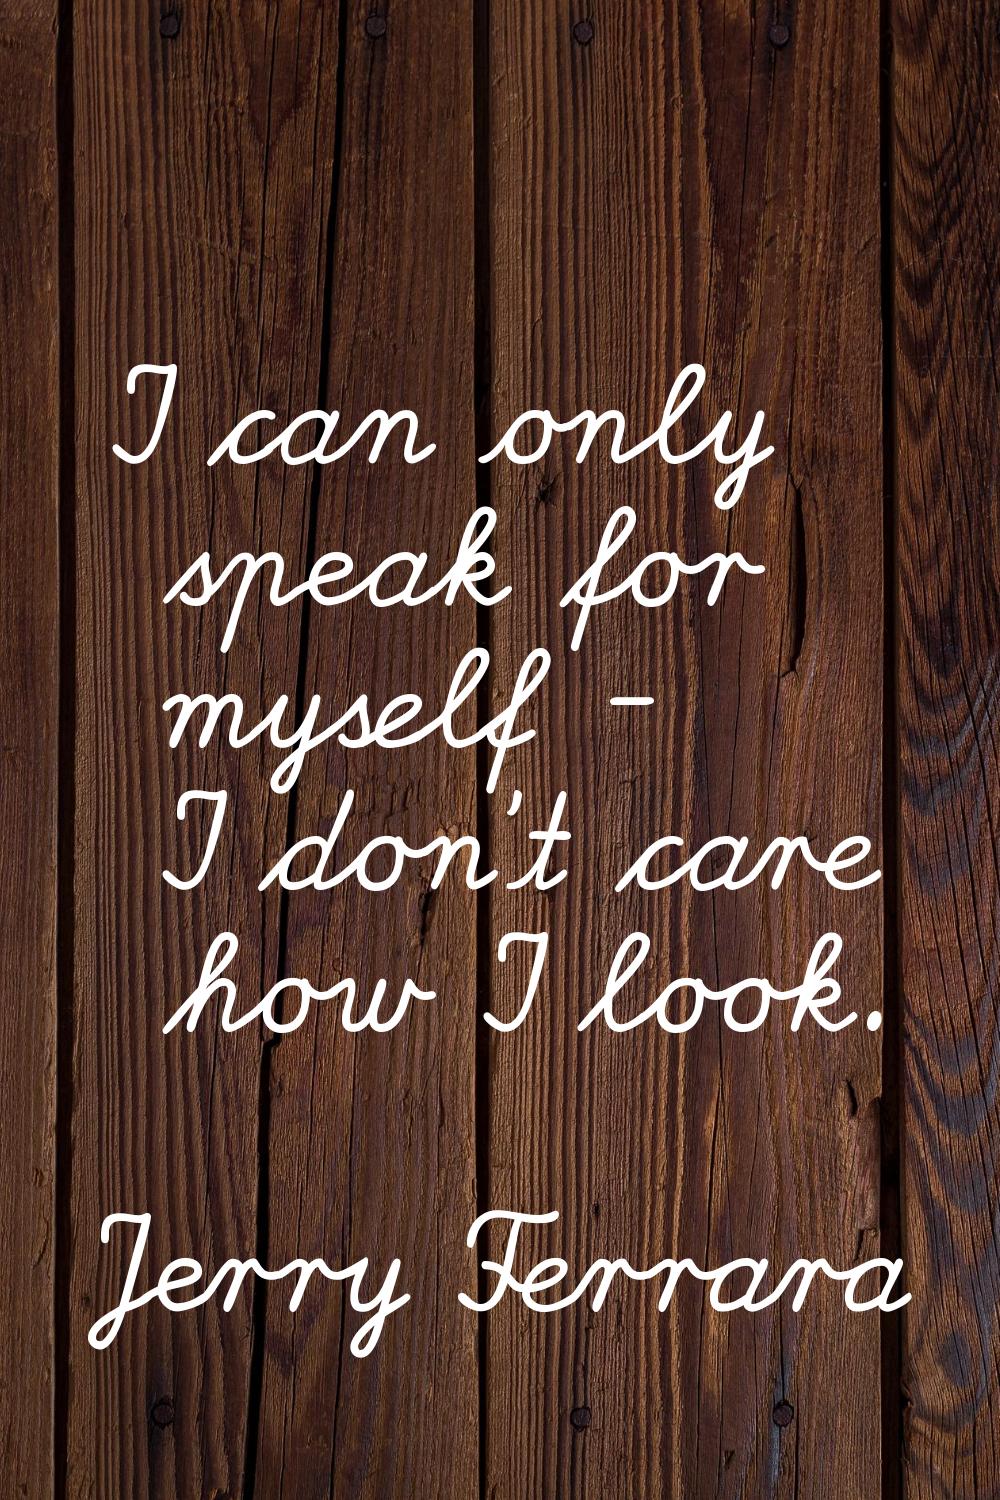 I can only speak for myself - I don't care how I look.